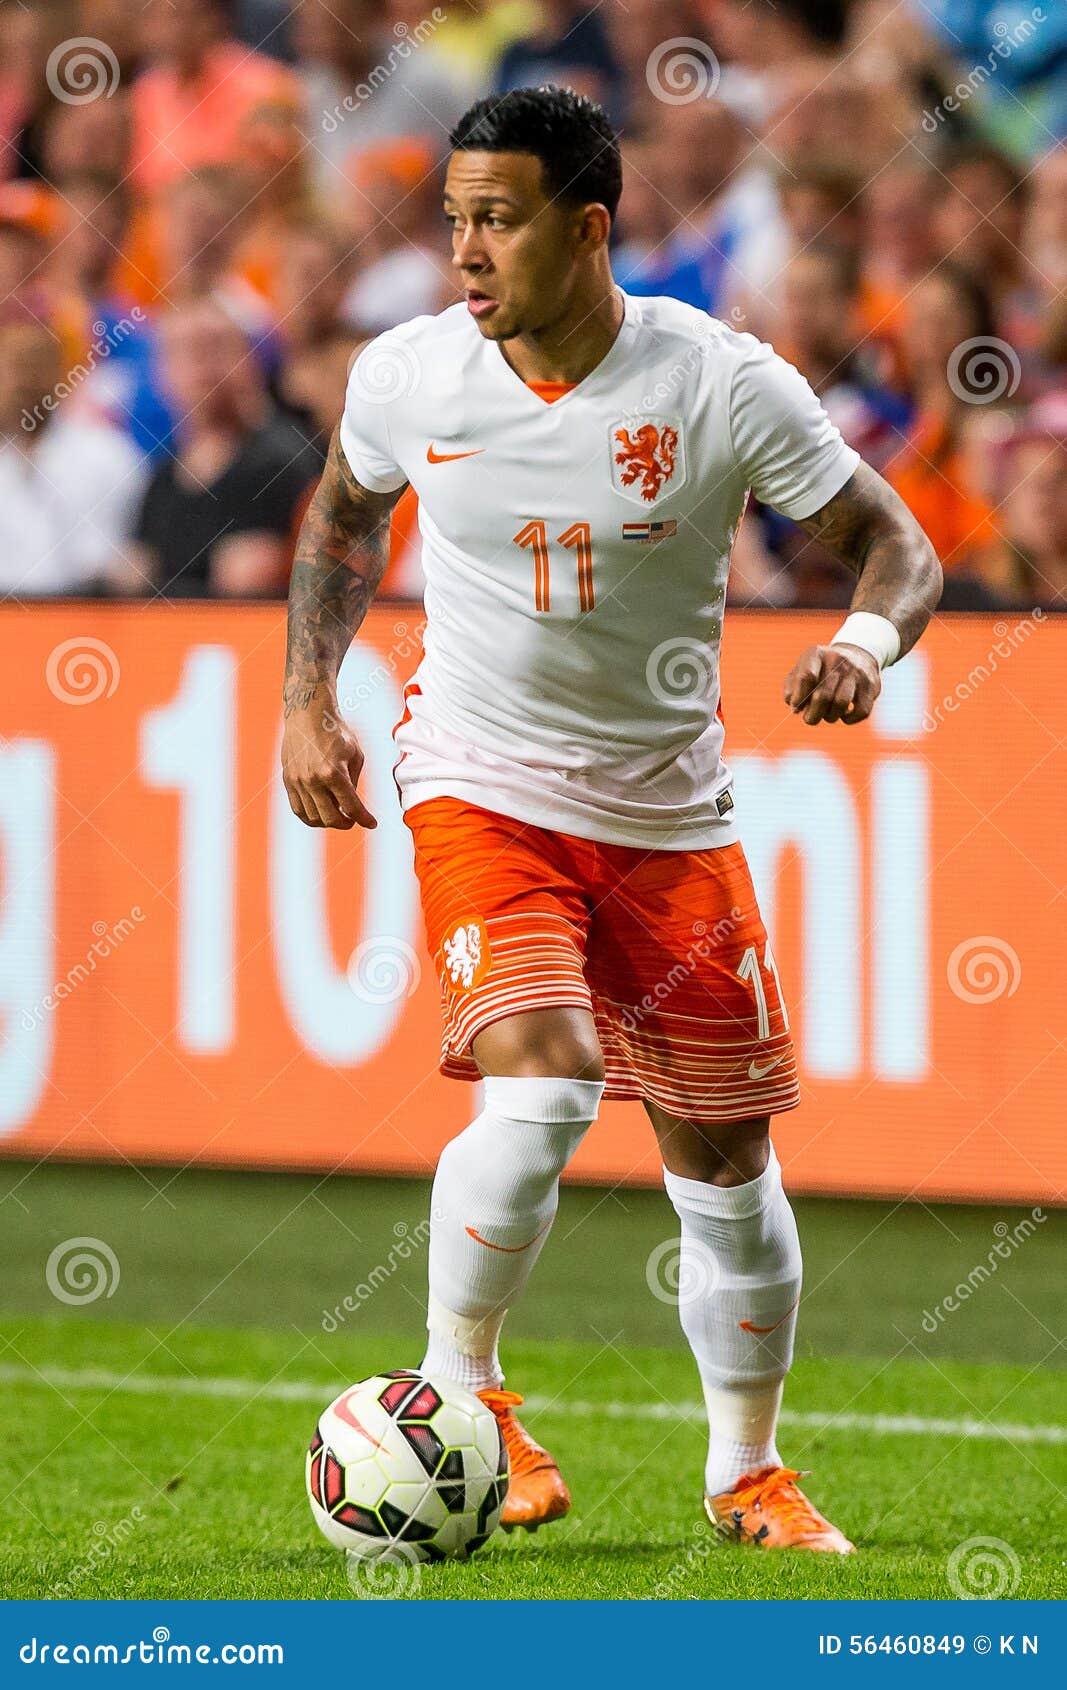 Memphis Depay In The Dutch Soccer Team Editorial Stock Image - Image of